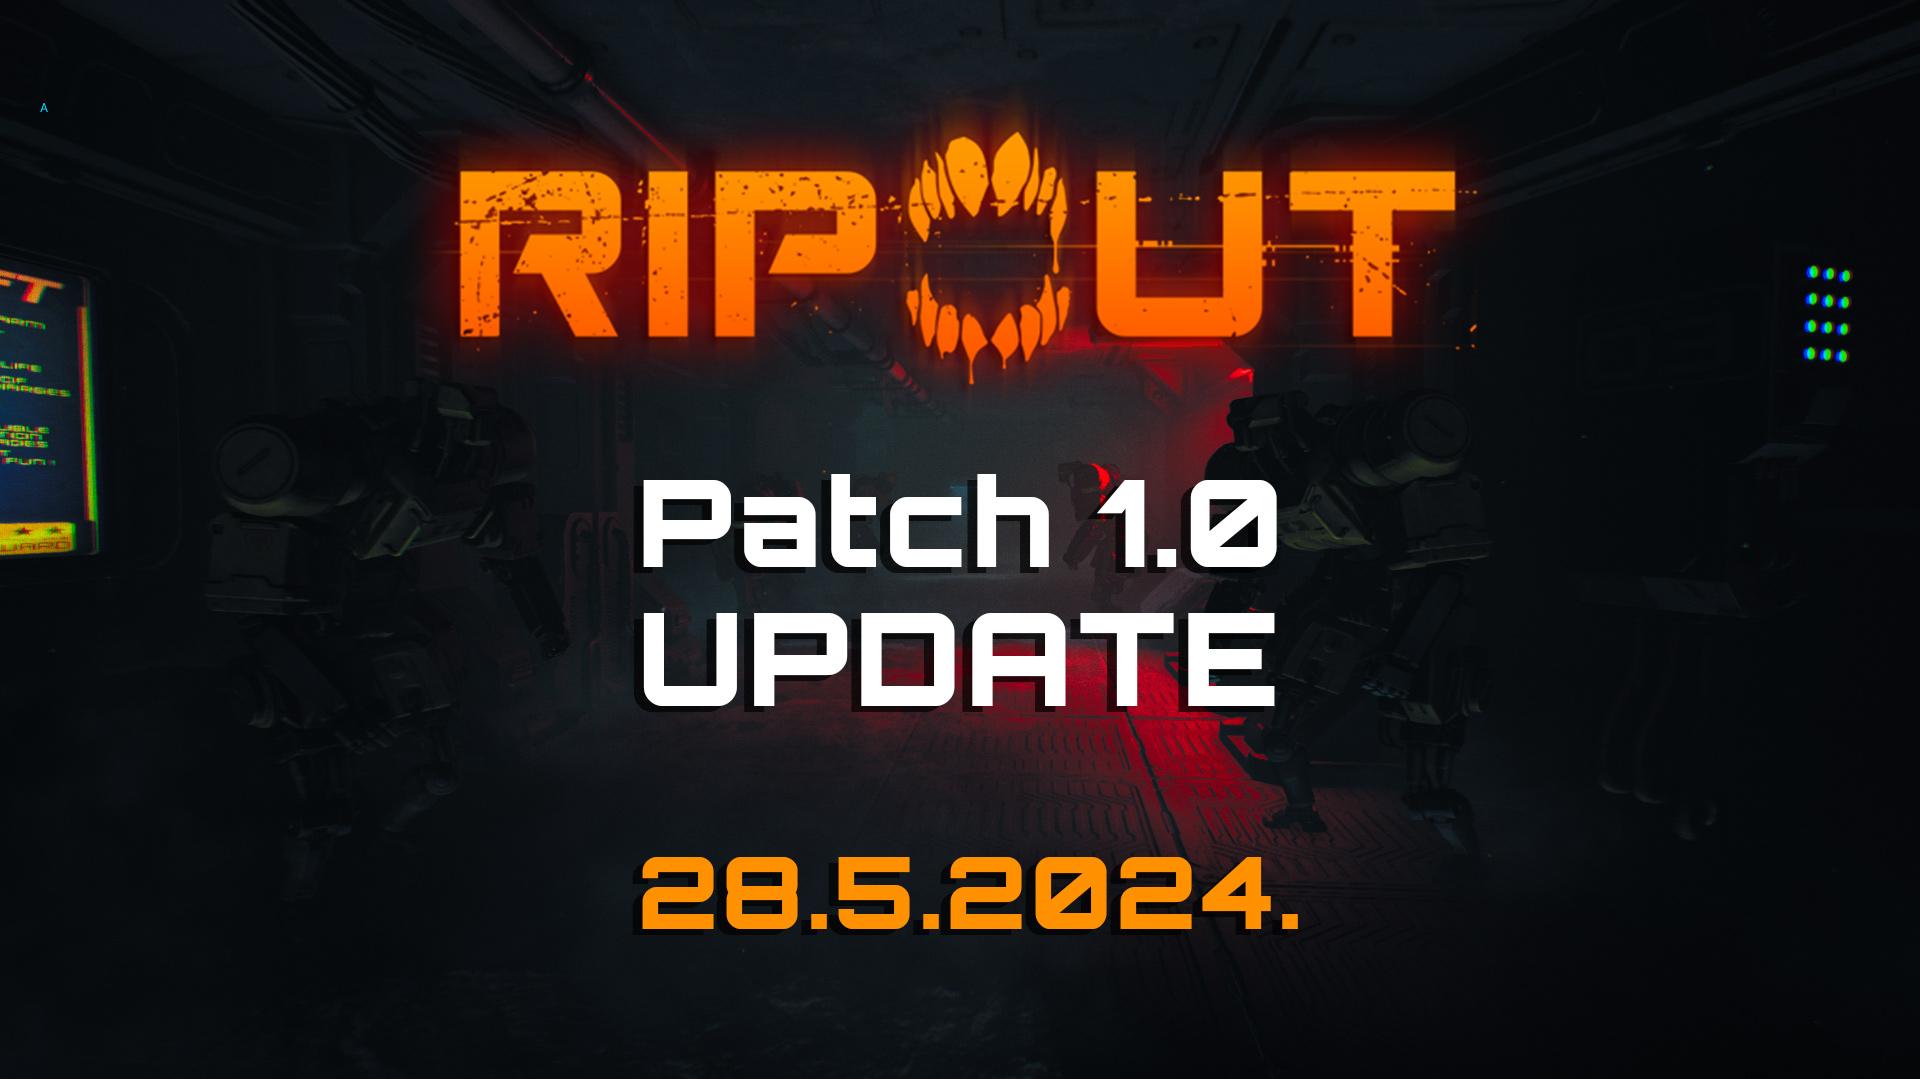 Ripout Content Update: Patch 1.0 Update